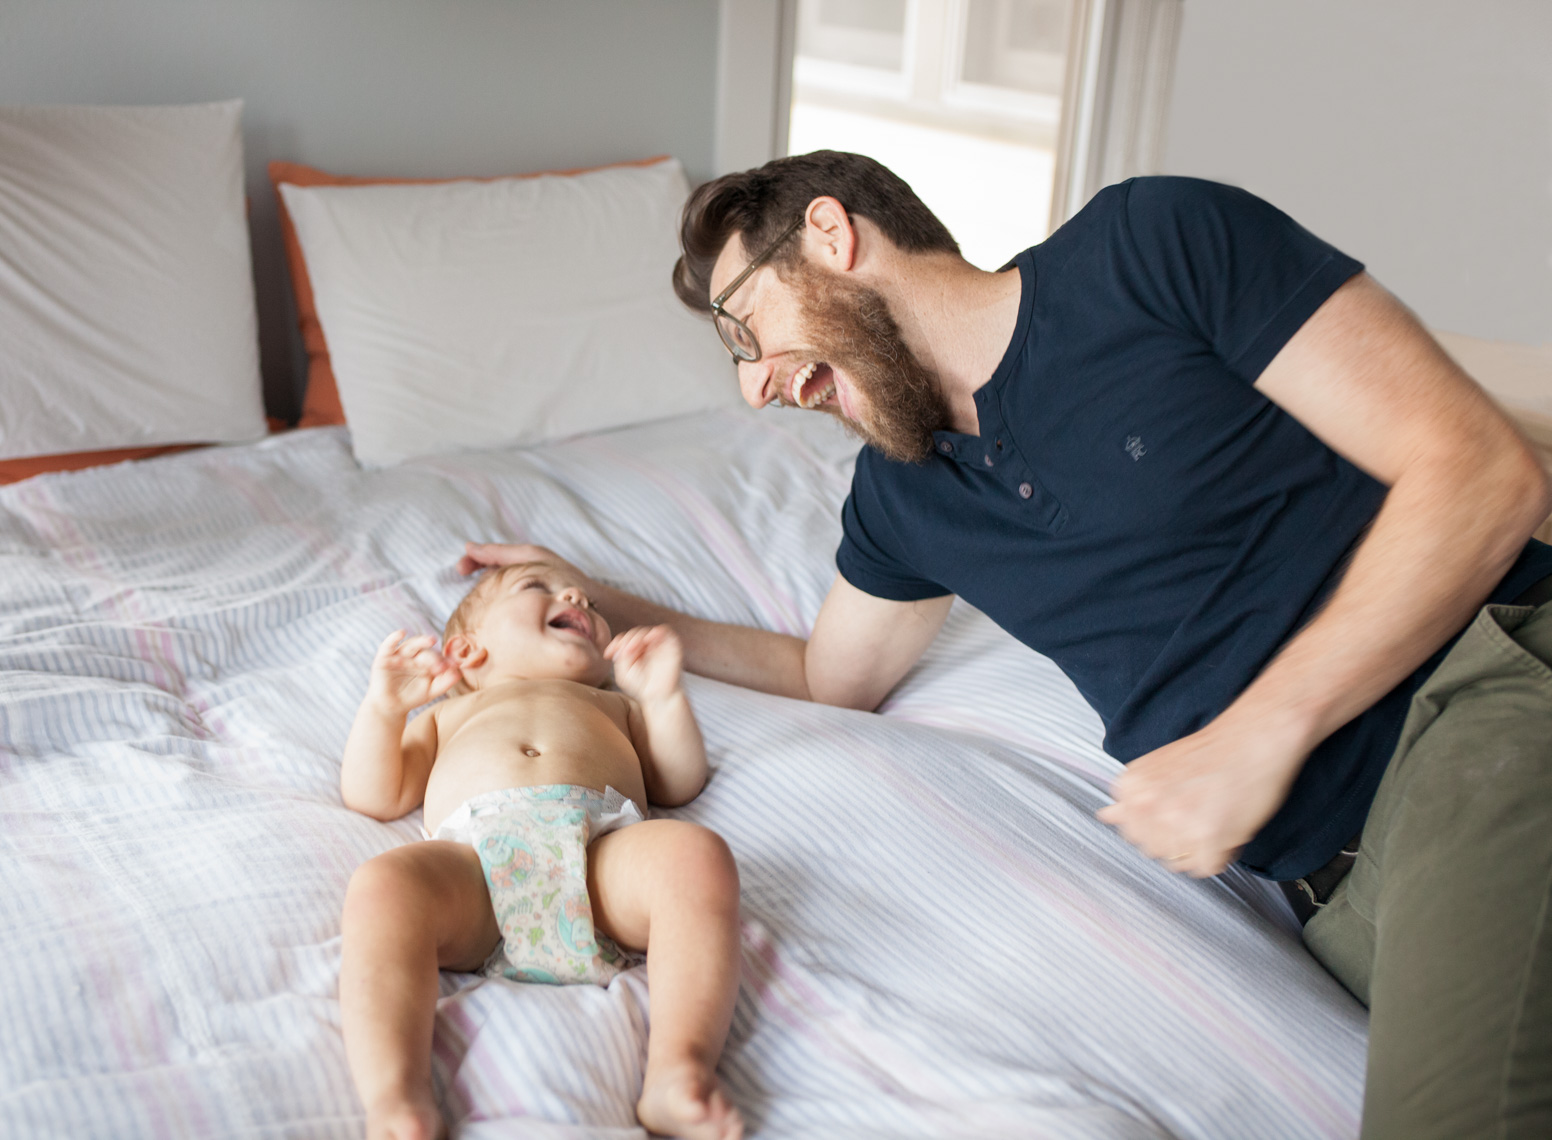 Fun loving dad with baby | Commercial Lifestyle Photographer